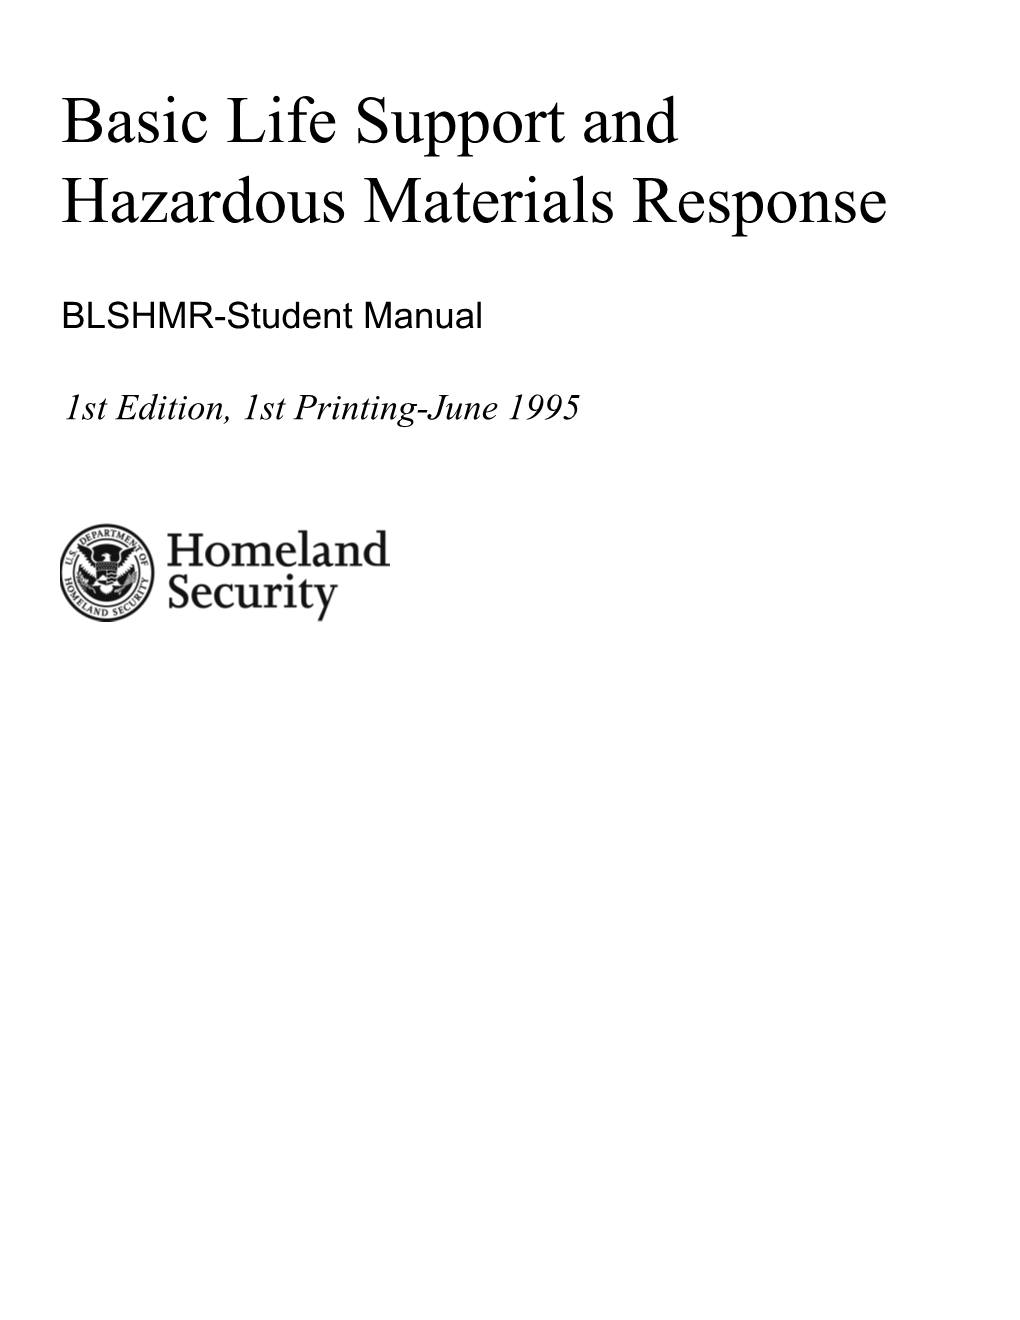 Basic Life Support and Hazardous Materials Response--Student Manual